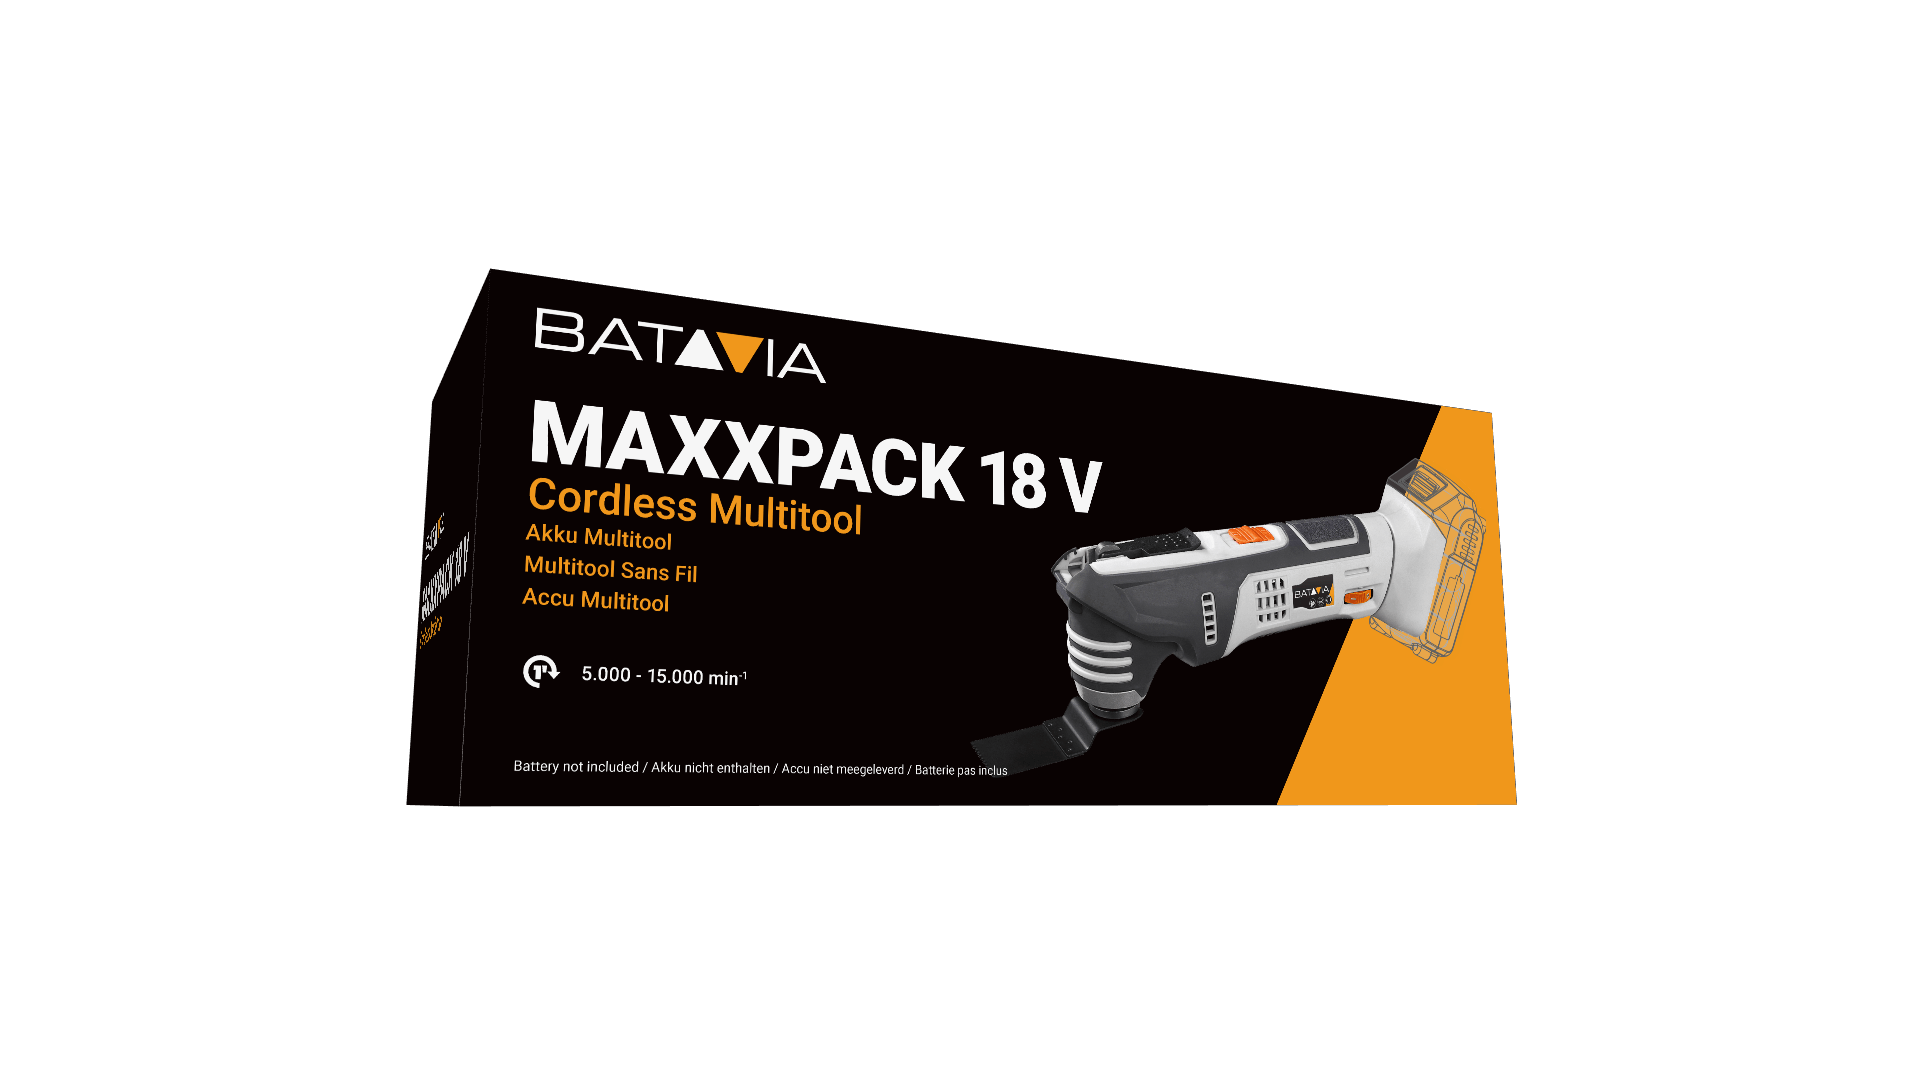 Packaging 18V Multitool | Maxxpack collection | Batavia